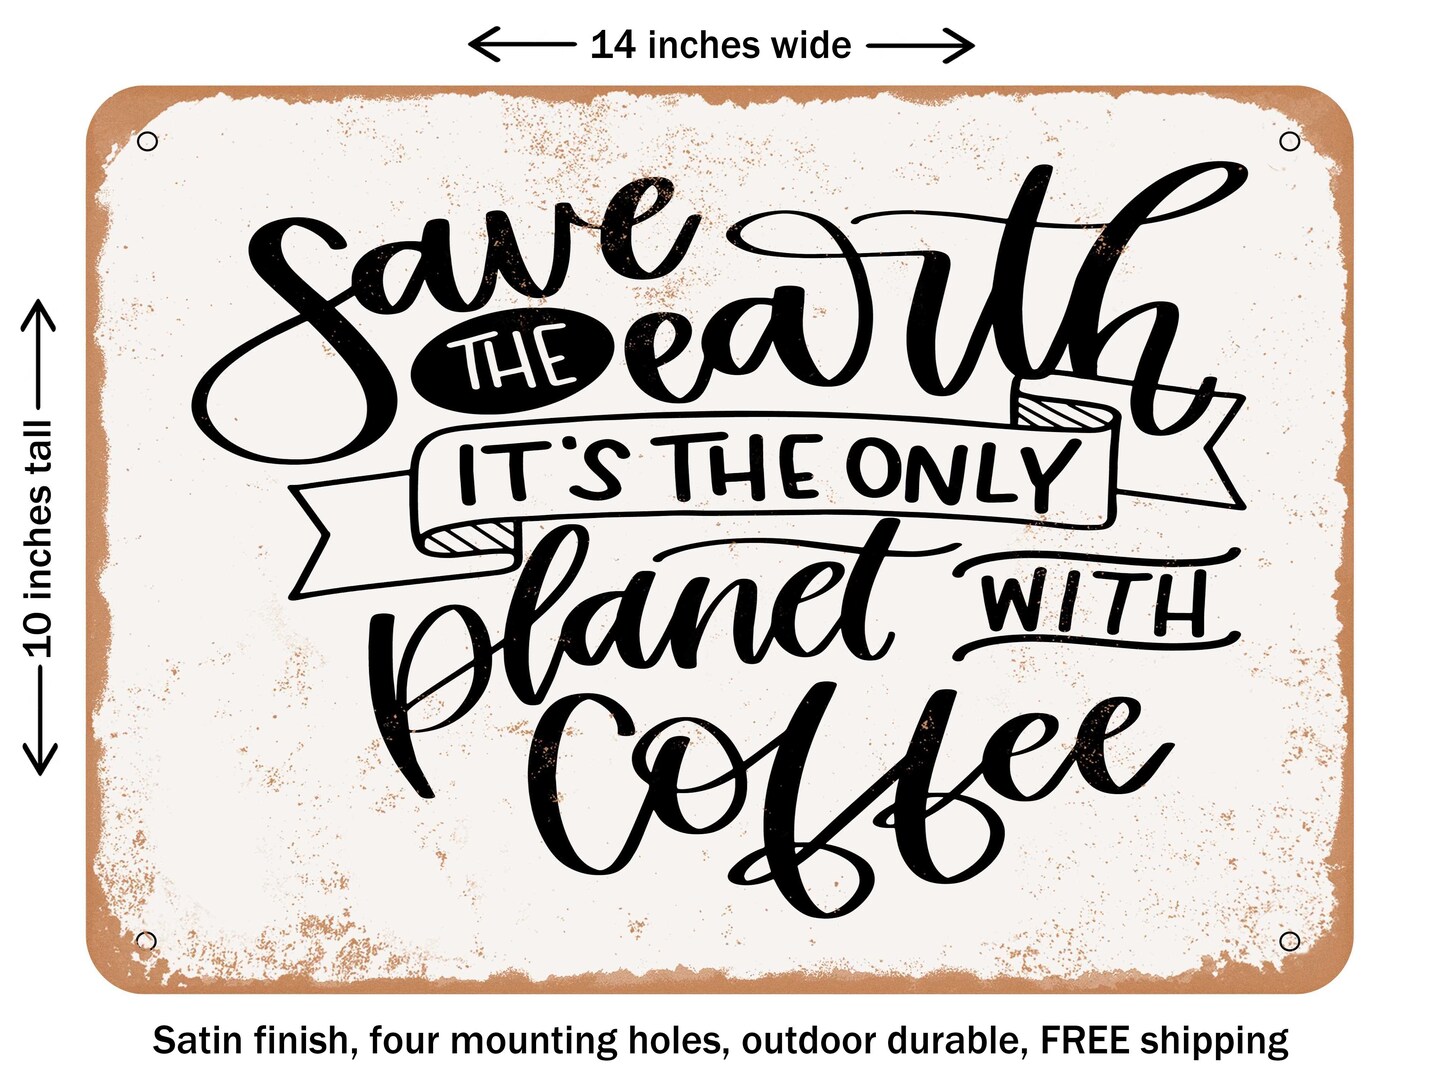 DECORATIVE METAL SIGN - Save the Earth Coffee - Vintage Rusty Look